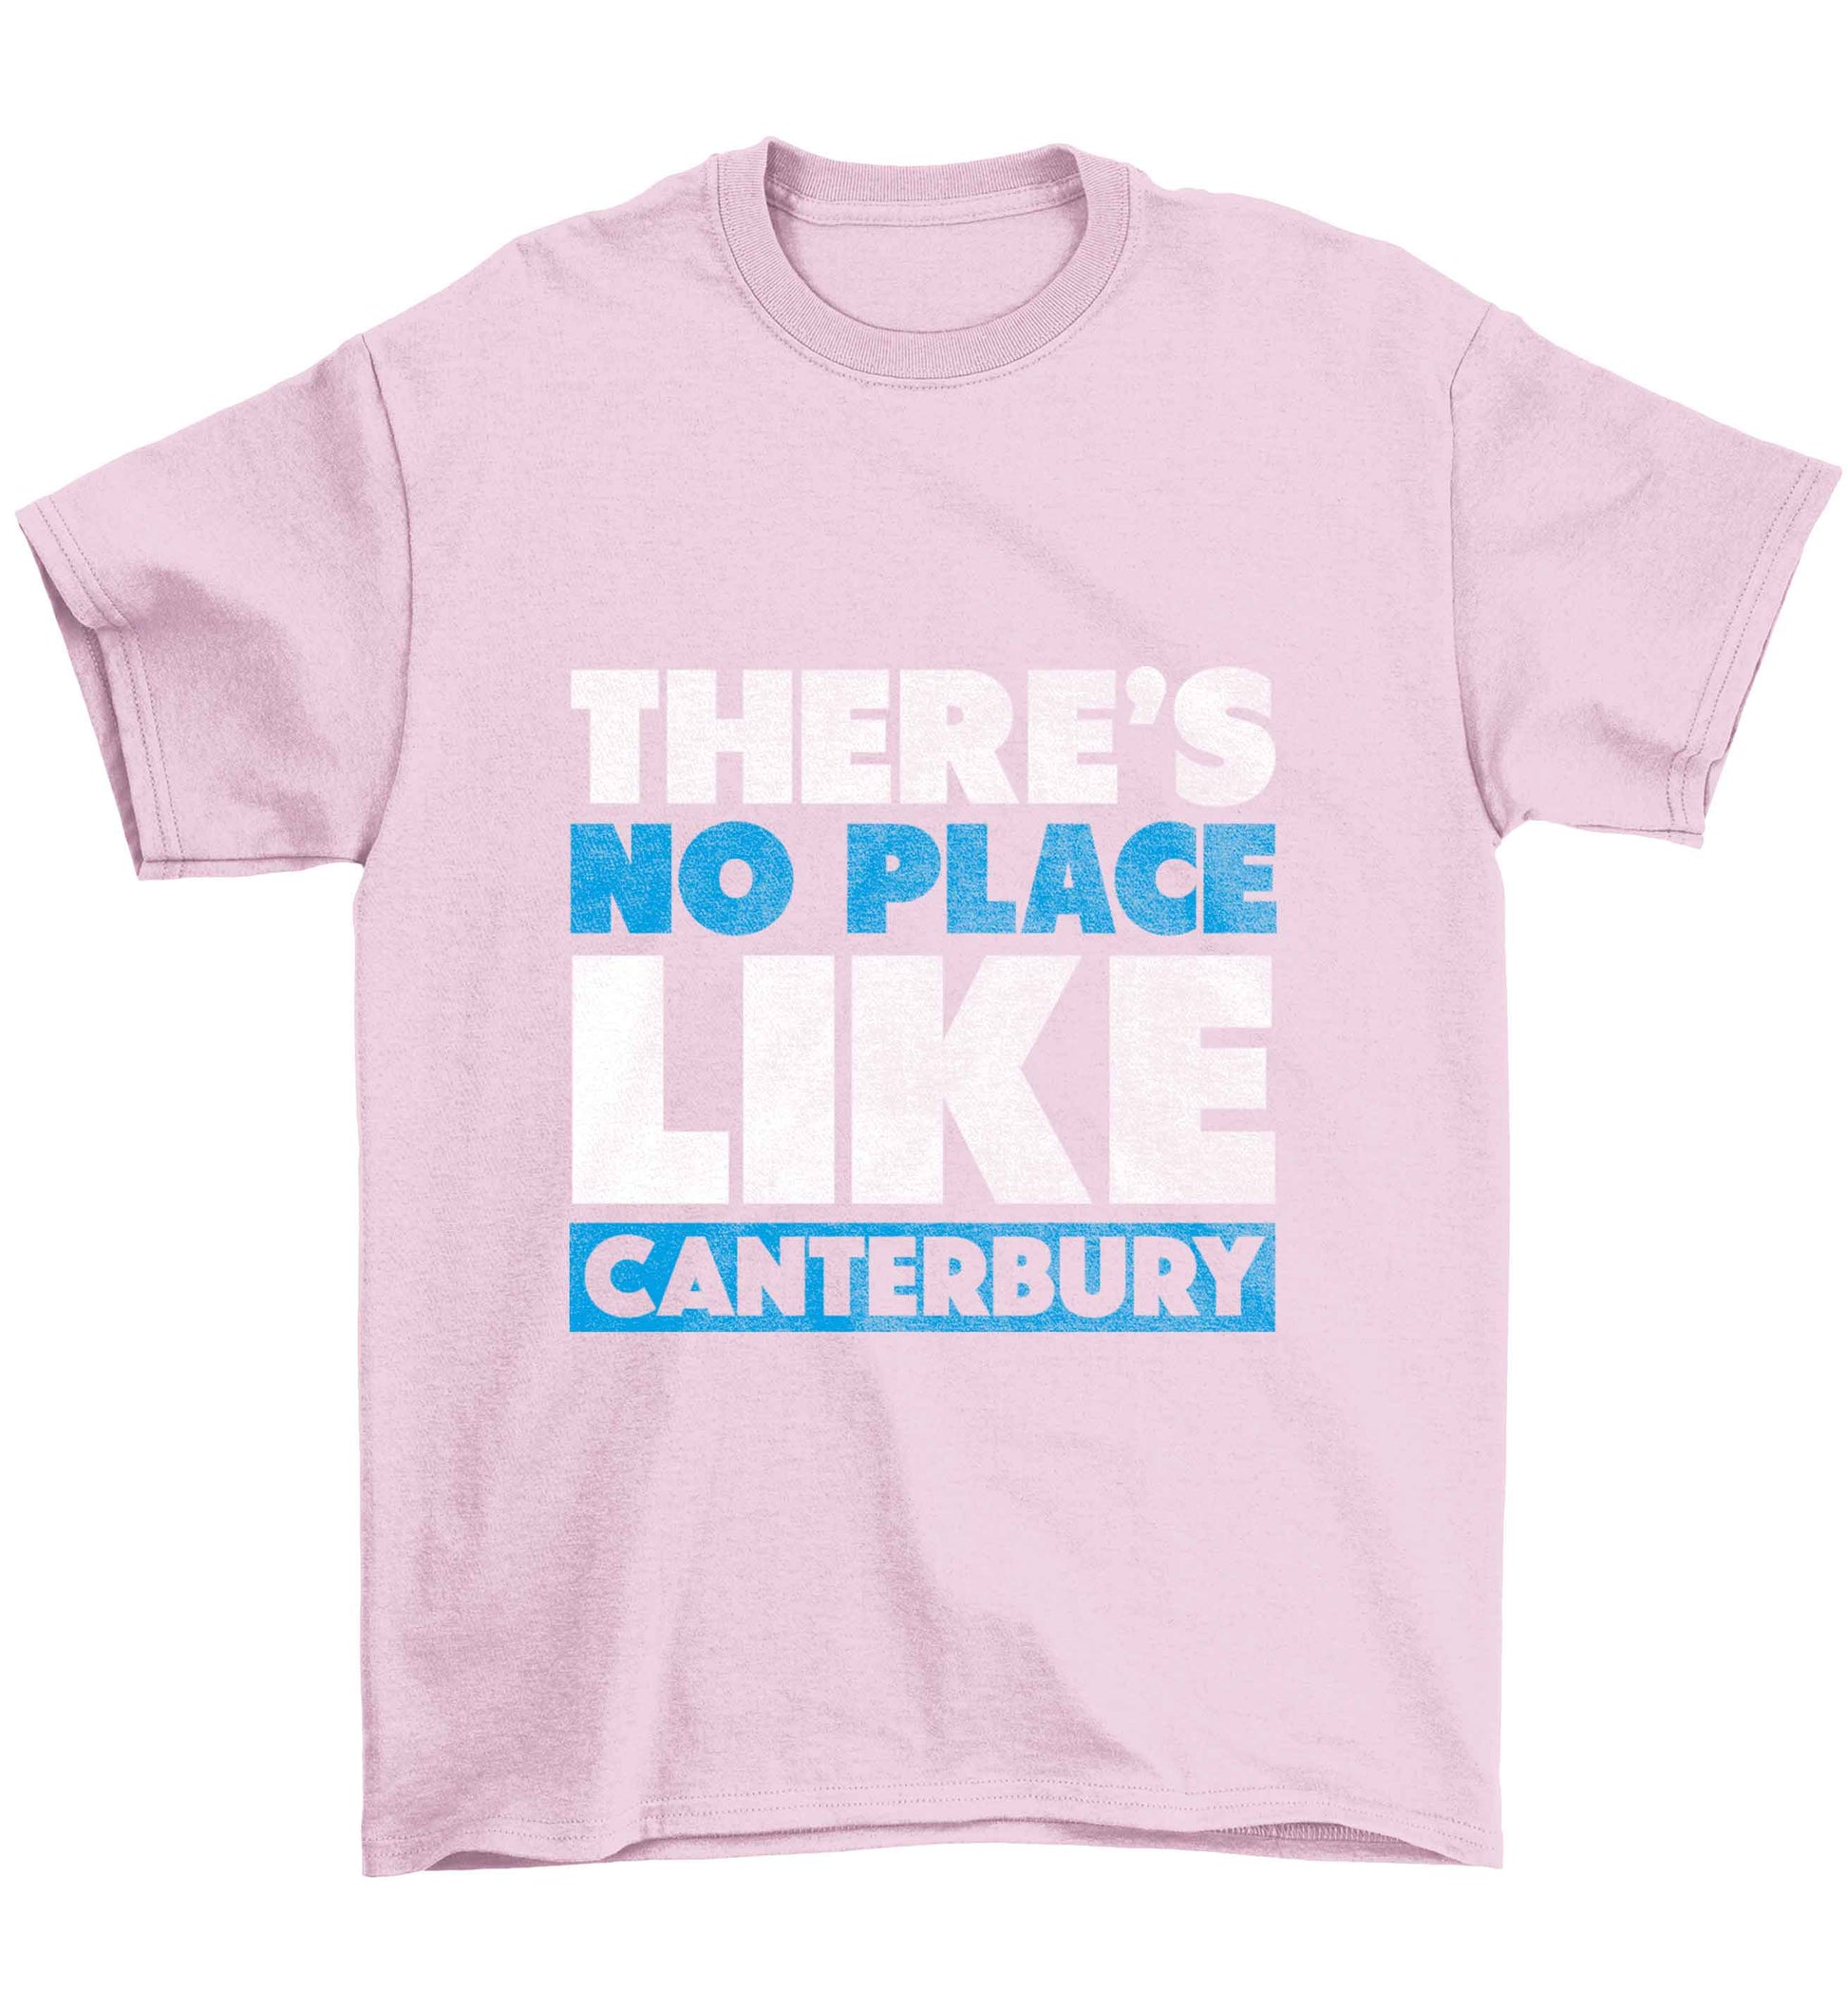 There's no place like Canterbury Children's light pink Tshirt 12-13 Years